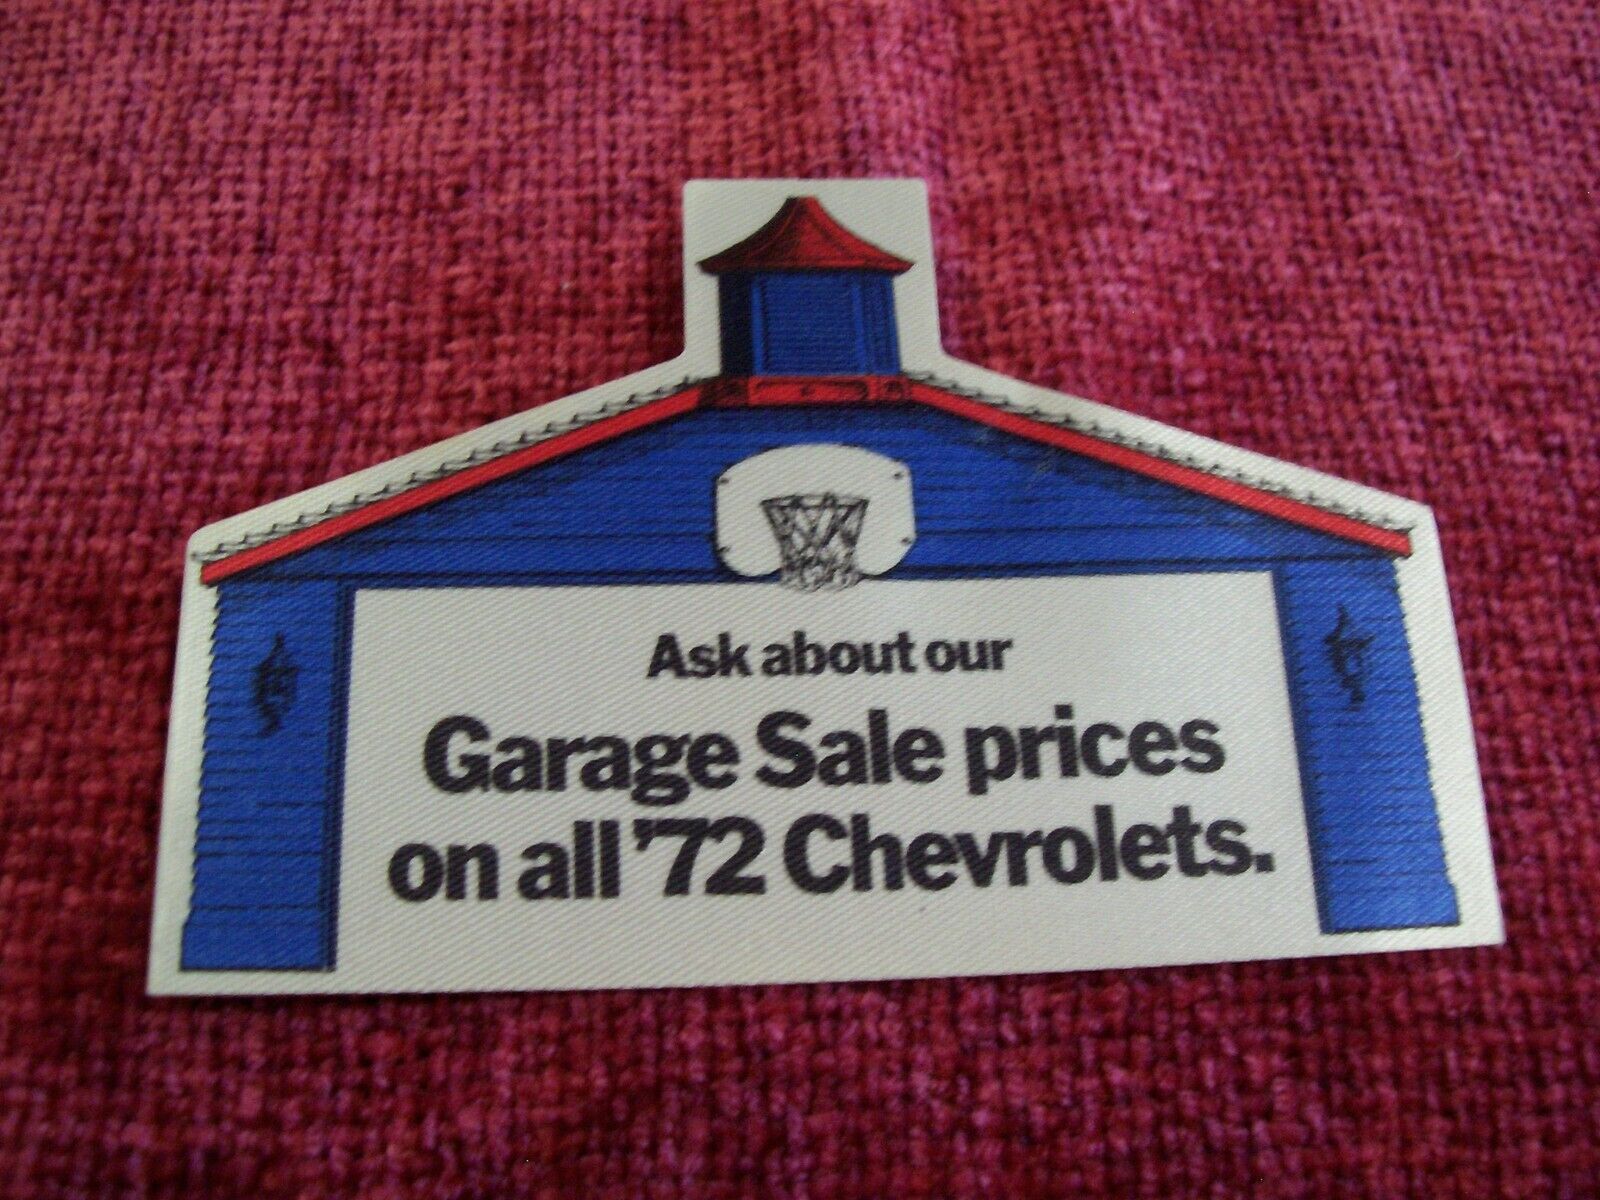 CHEVROLET--1972 Promotion Patch--N.O.S.